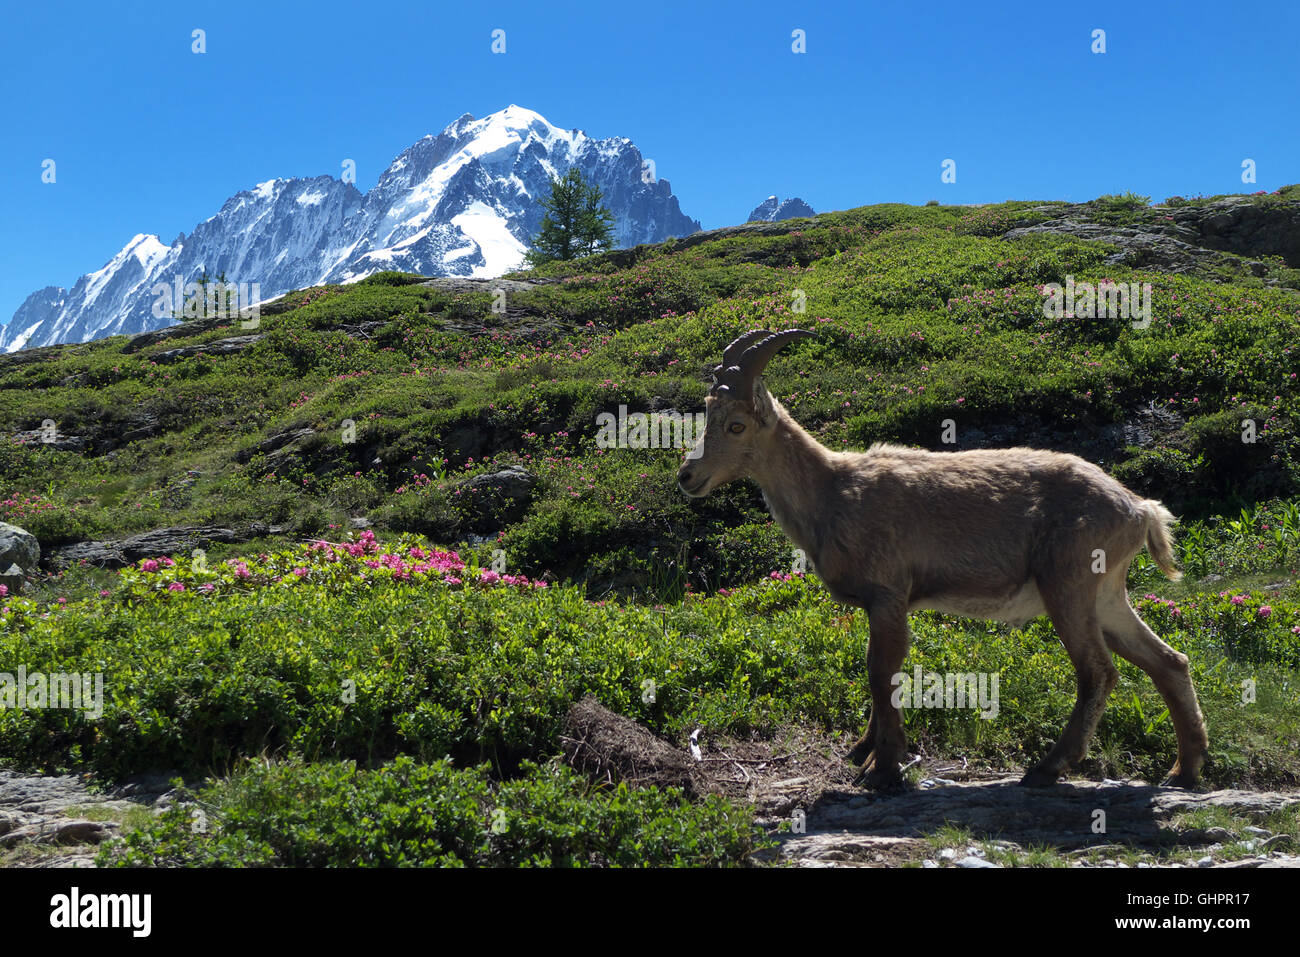 Young ibex, Aiguille Rouge nature reserve, Aiguille Verte in background, Chamonix valley, Savoy Alps, France, Europe, EU Stock Photo